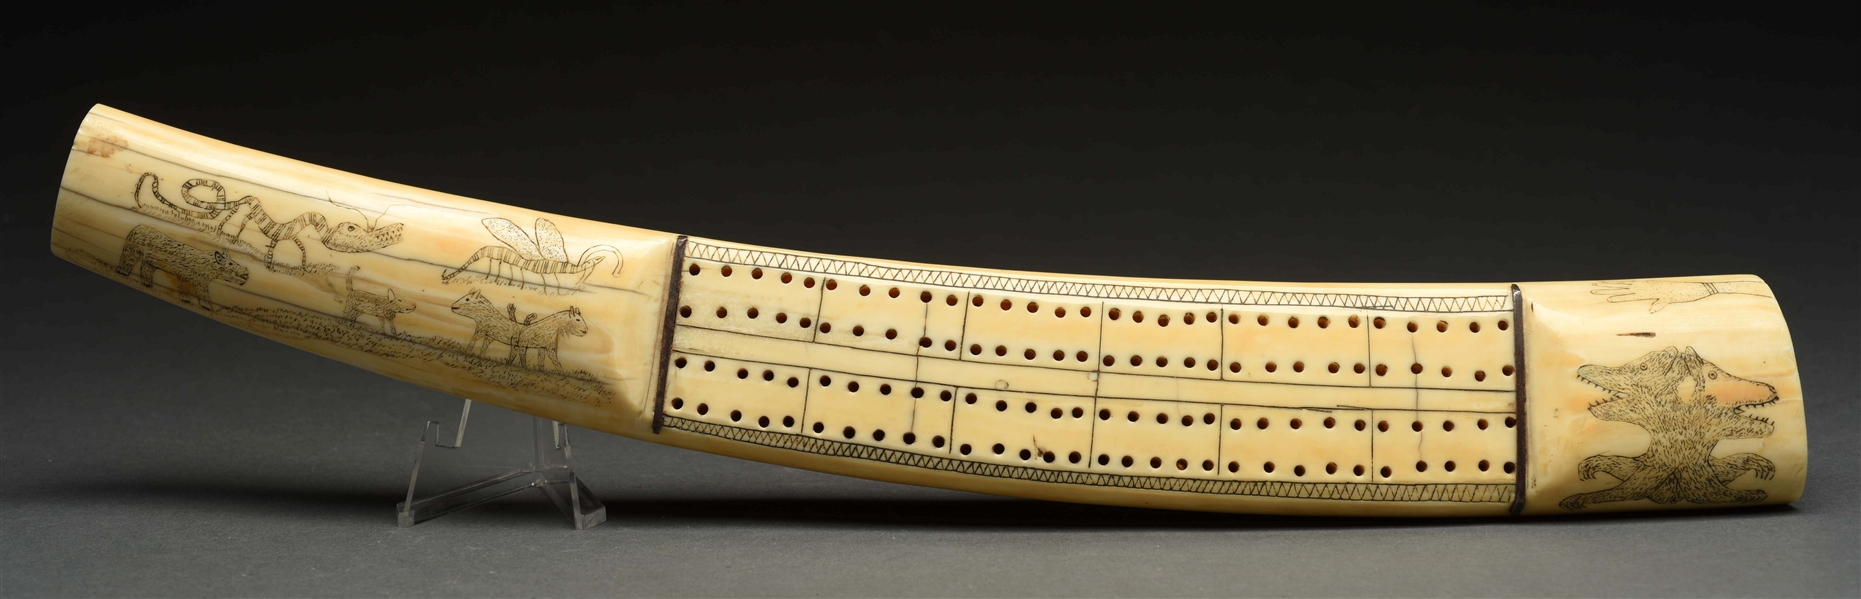 IVORY TUSK WITH CRIBBAGE BOARD AND SCRIMSHAW. 